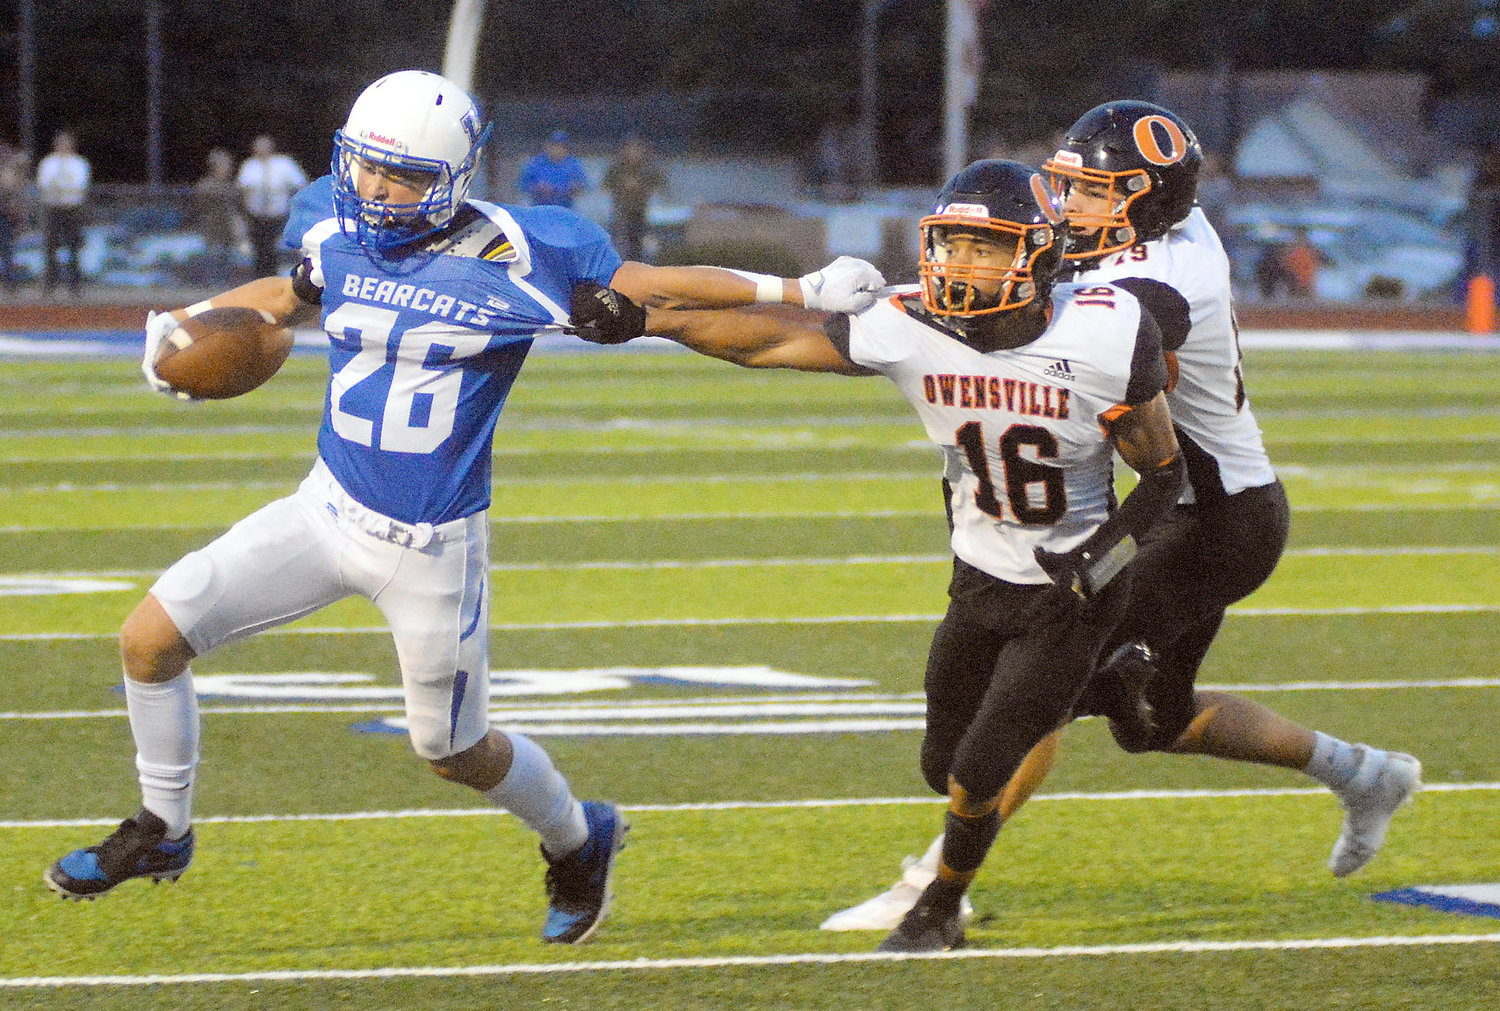 Dezmyn Moore (above, second from left) reaches out to grab Kole Eldringhoff’s jersey in hopes of slowing him up during the annual Gasconade County Bowl football game Friday night between the host Hermann Bearcats and Owensville Dutchmen.  OHS will host Pacific Friday night at 7 p.m., to celebrate their annual homecoming.